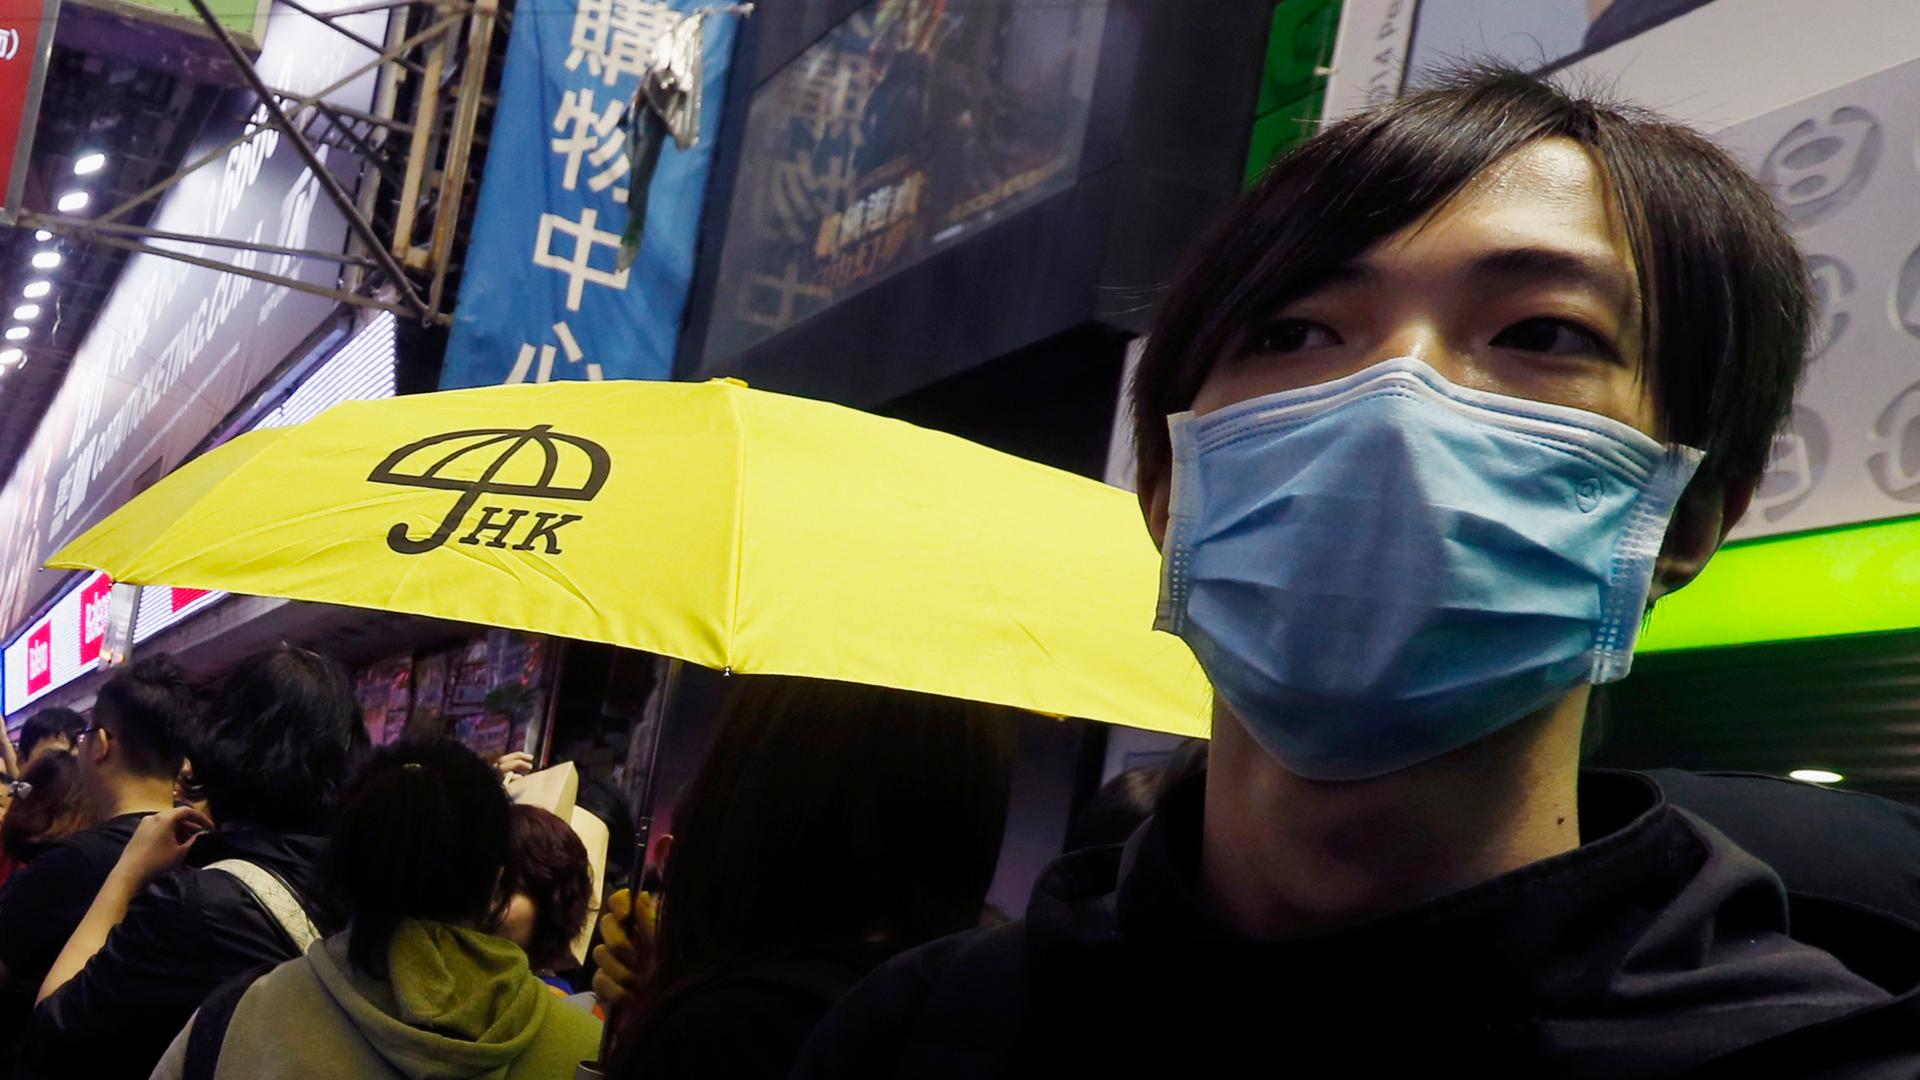 A pro-democracy protester carries a yellow umbrella, symbol of the Occupy Central civil disobedience movement, while gathering with other protesters at Mong Kok shopping district in Hong Kong on November 27, 2014. 